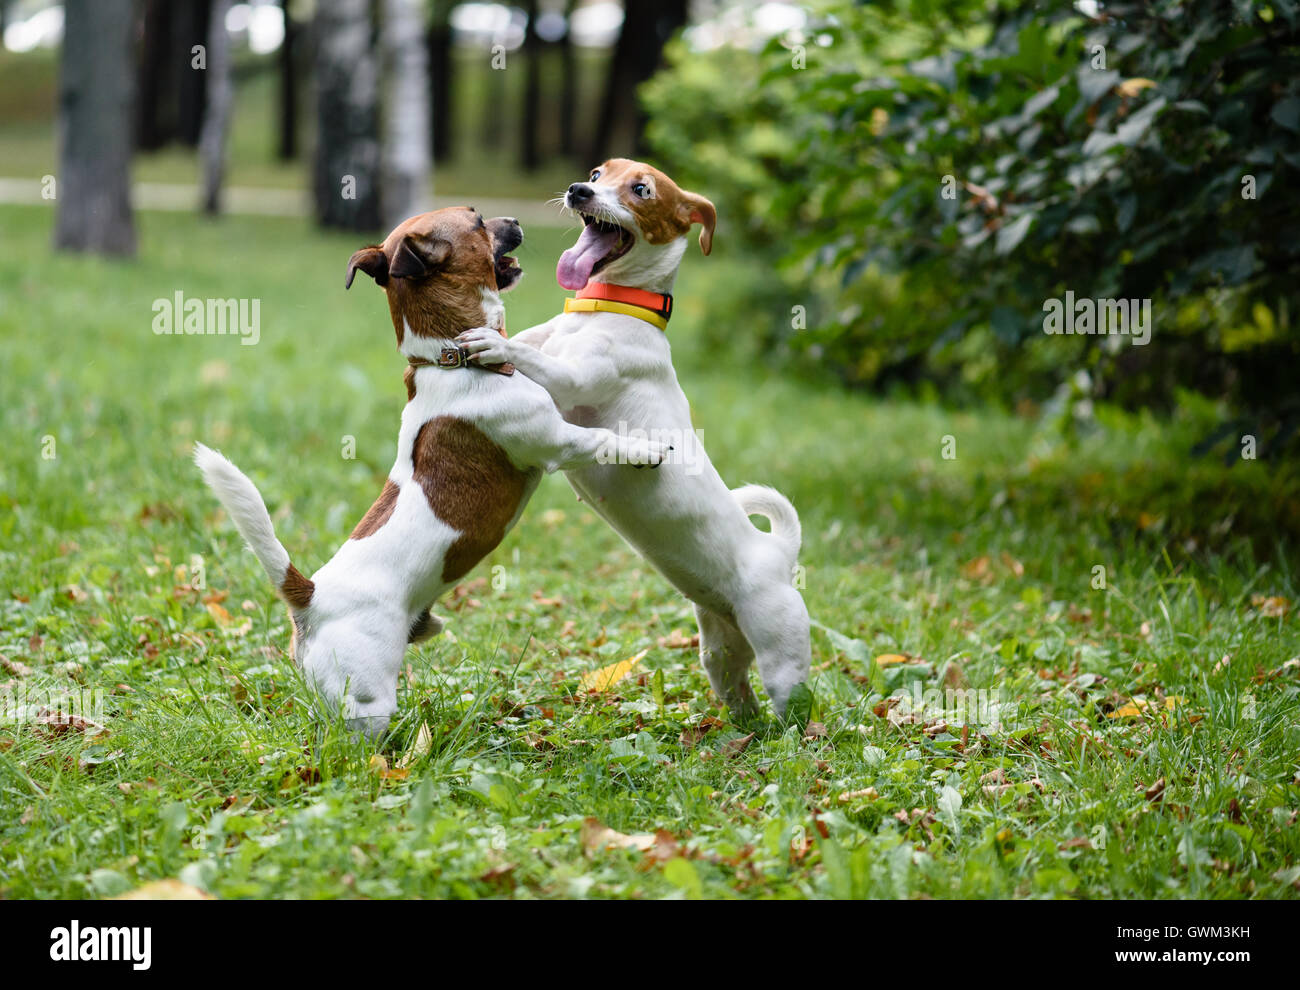 Two funny dogs playing and dancing Stock Photo - Alamy